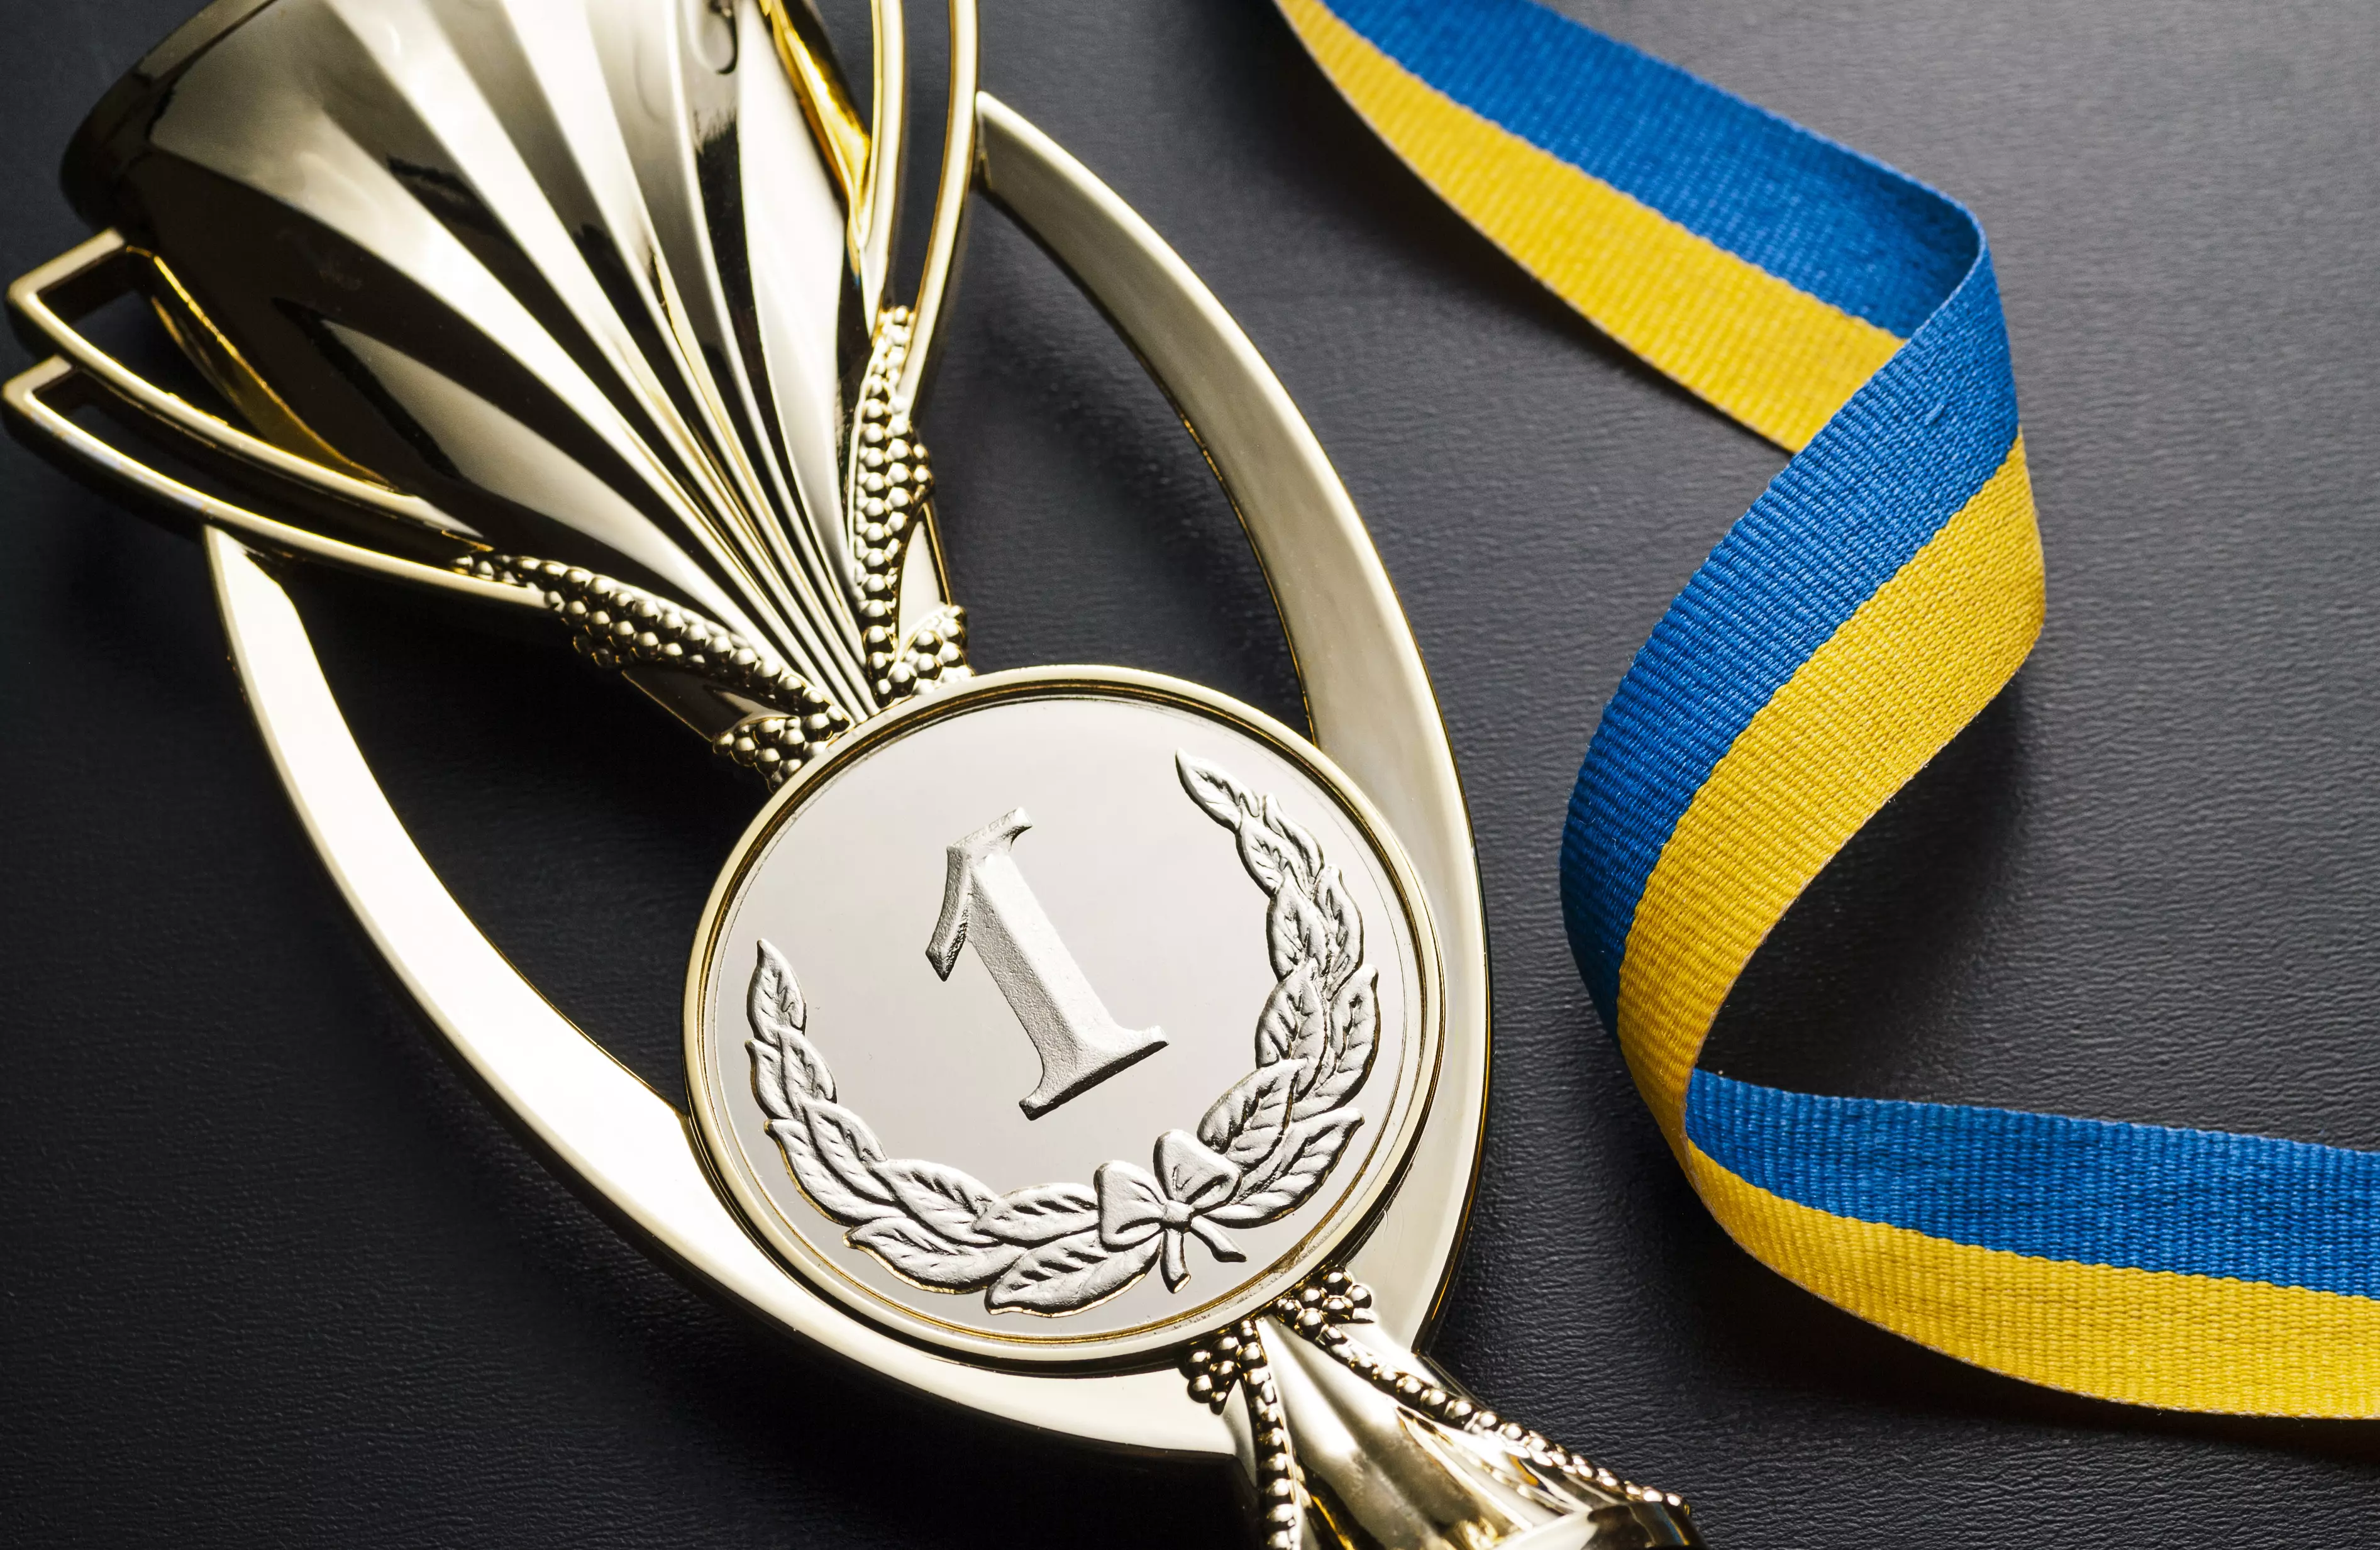 Infographic of a gold winners medal